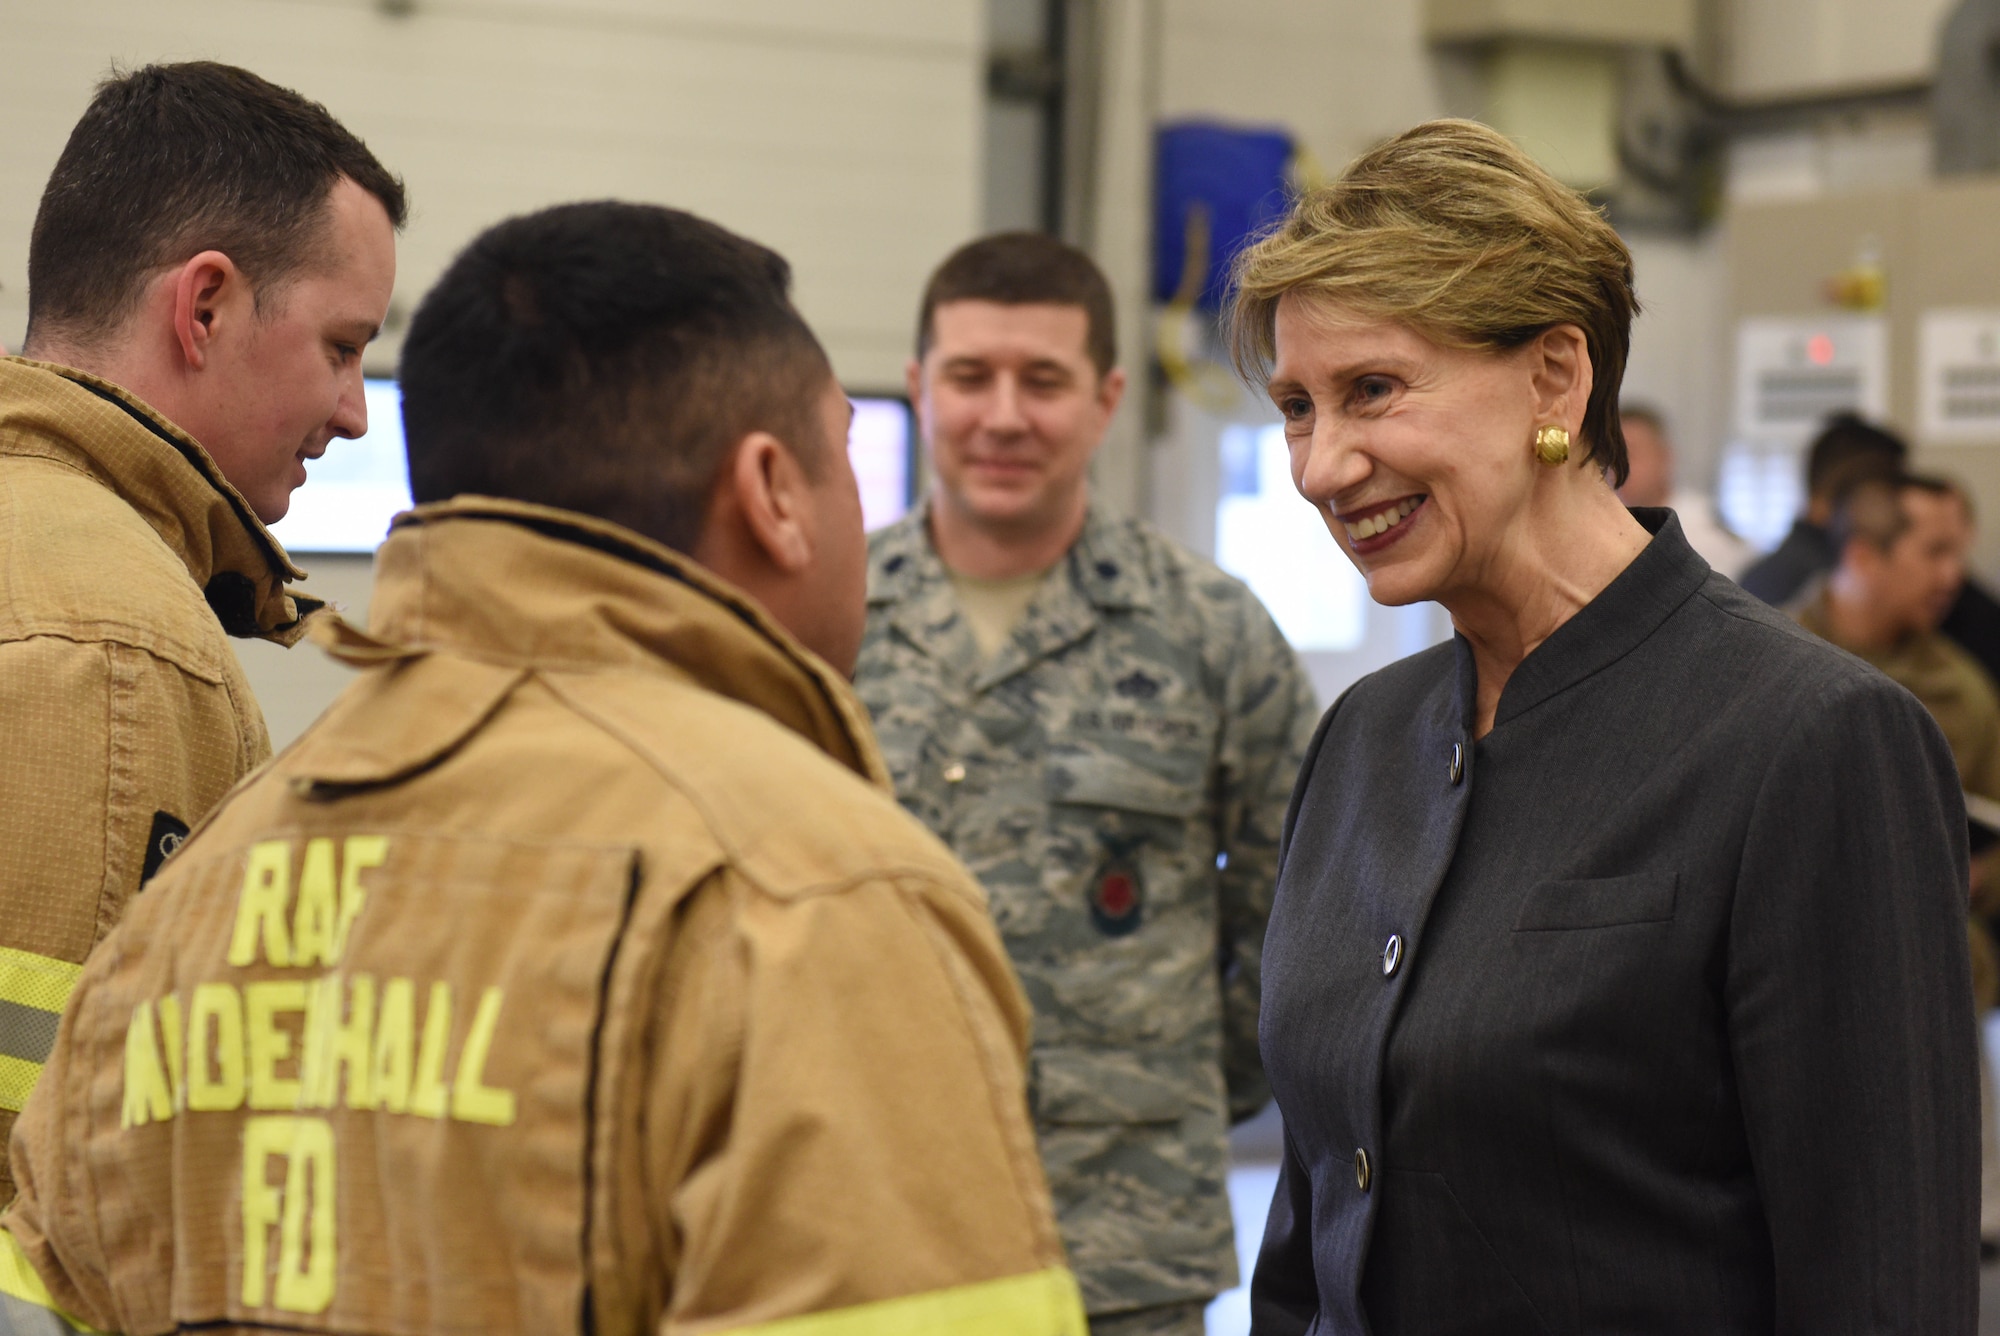 Secretary of the Air Force Barbara Barrett meets with Airmen from the 100th Civil Engineer Squadron fire department during her visit to RAF Mildenhall, England, Feb. 13, 2020.  Barrett stopped at the air traffic control tower, fire station and various units within the 352 Special Operations Wing during her visit. (U.S. Air Force photo by Staff Sgt. Luke Milano)